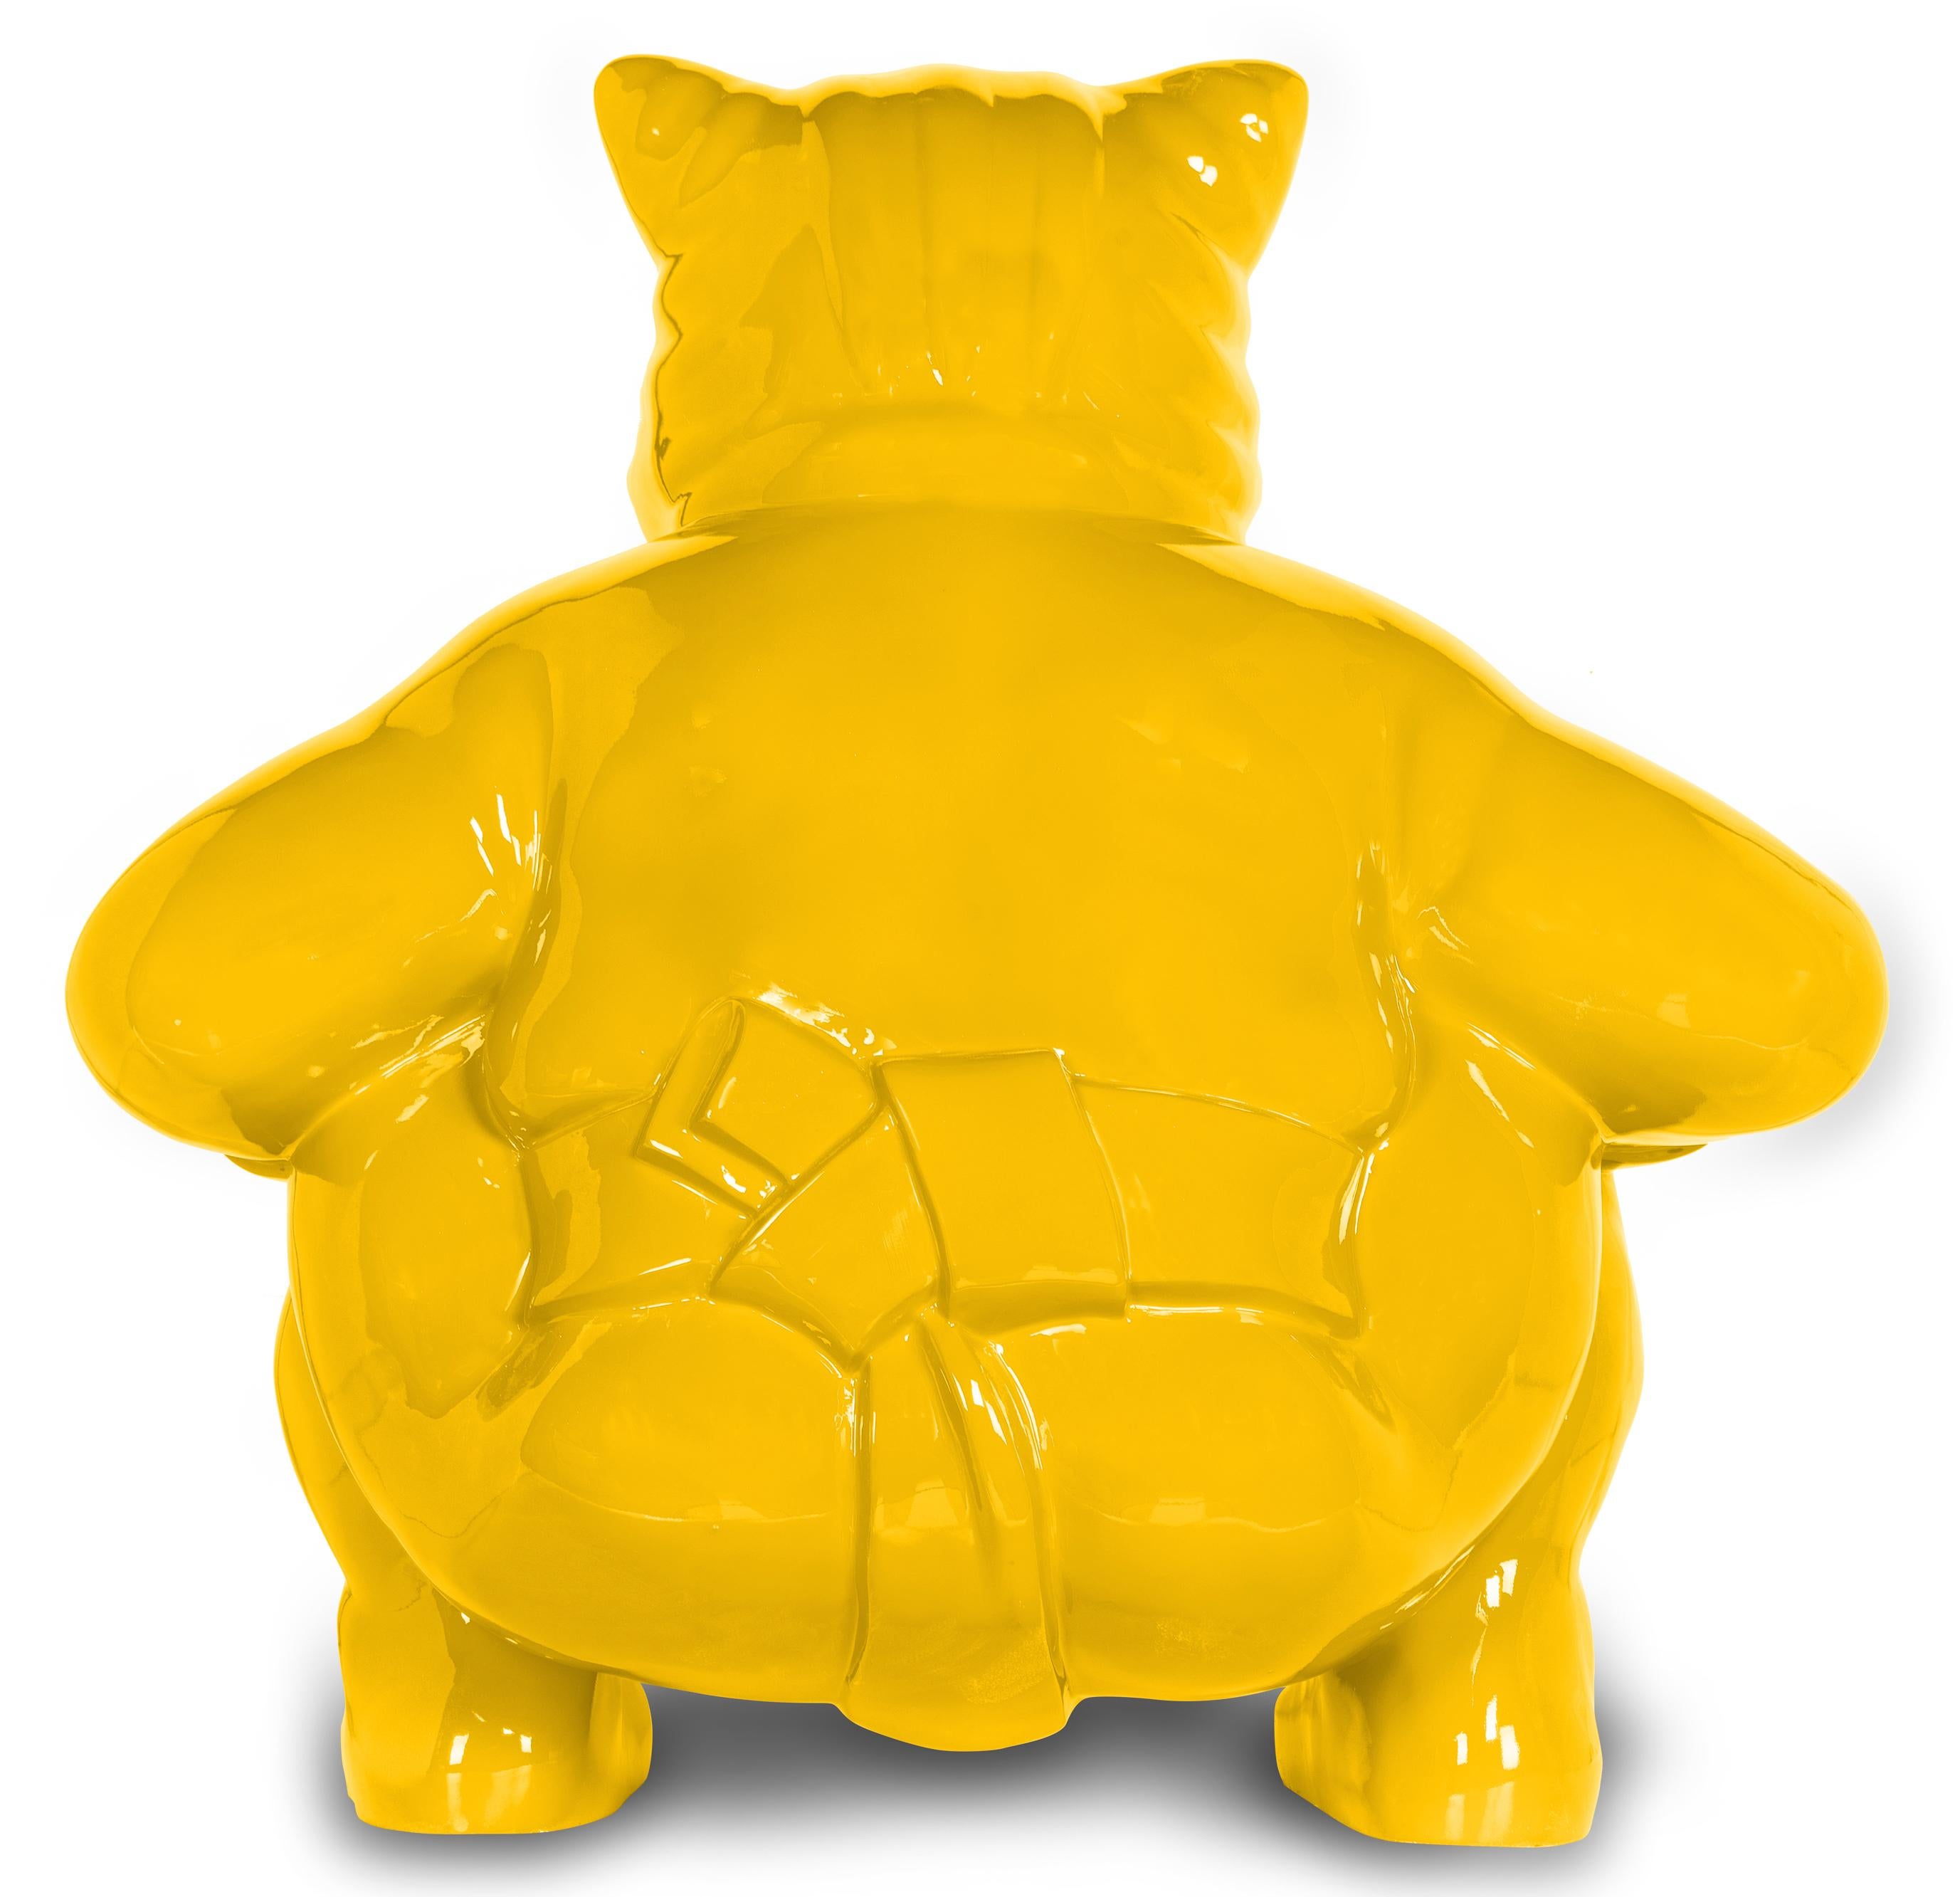 Majestic Sumocat :  Yellow Dance and Battles of Balance - Contemporary Sculpture by HIRO ANDO